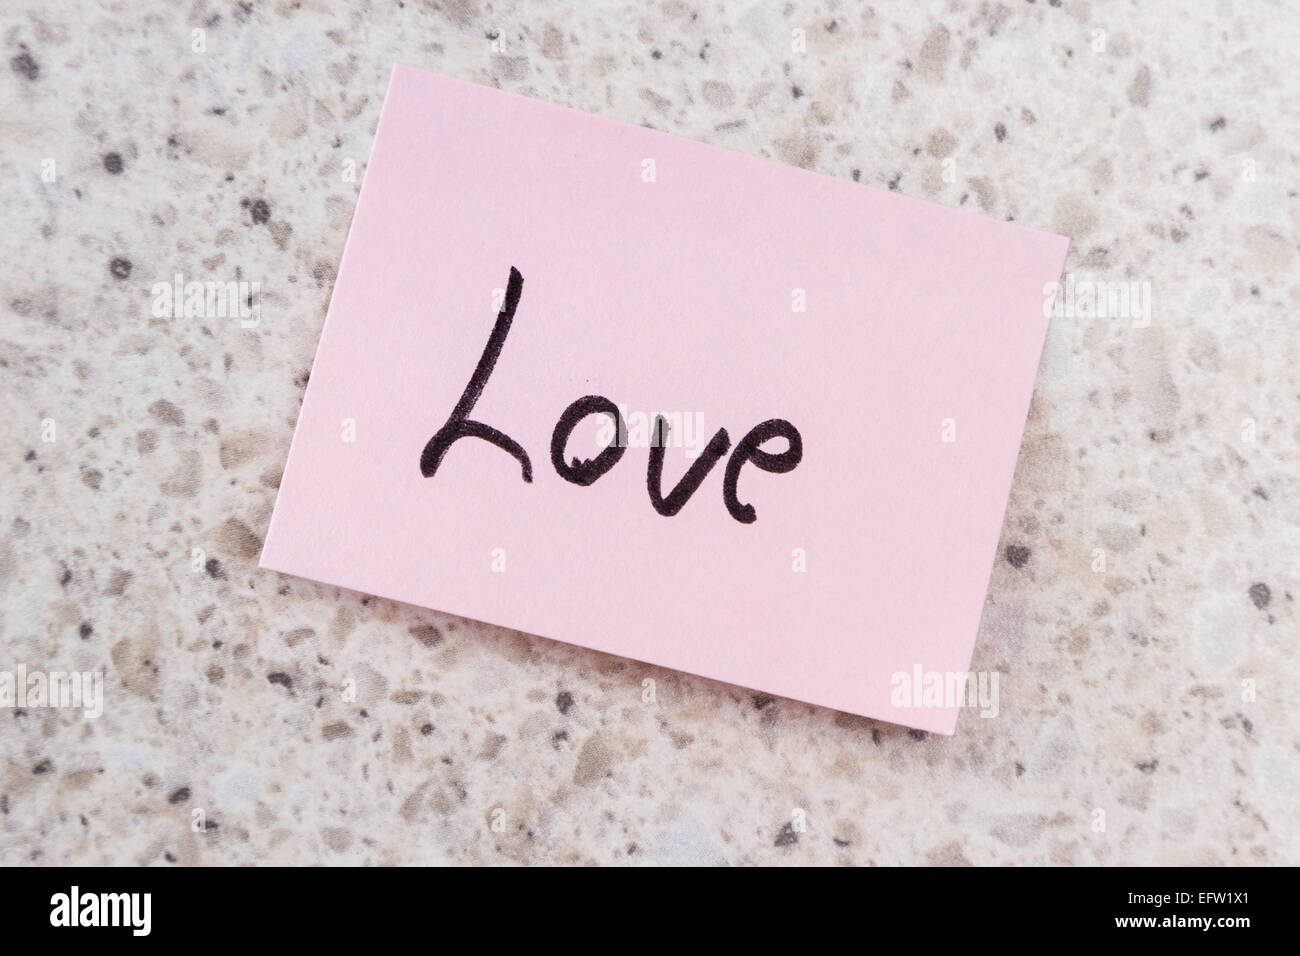 Small Pink Note With The Word Love On An Office Desk Background